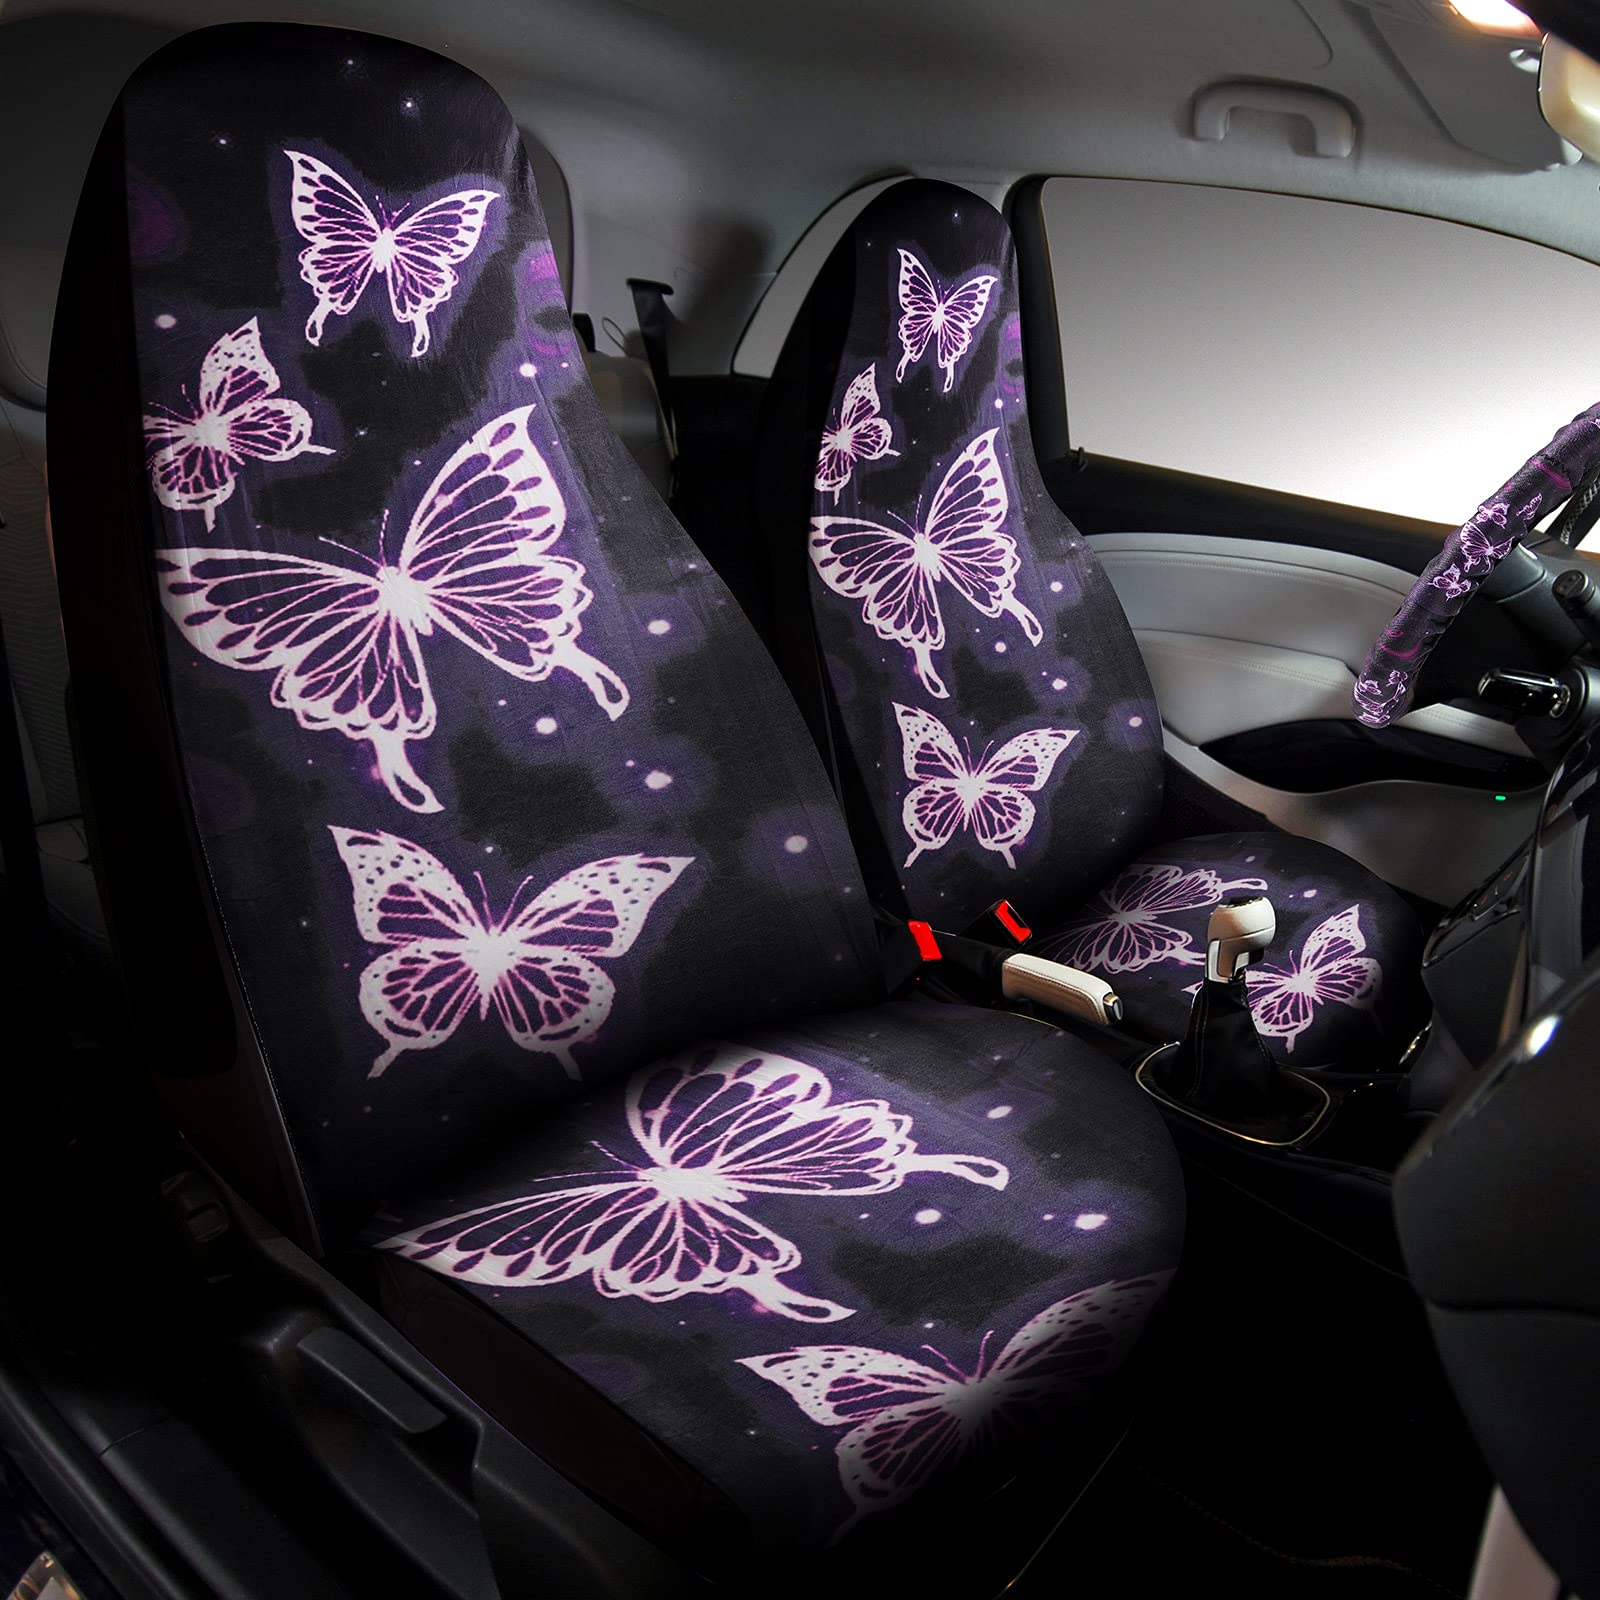 15 Pieces Purple Butterfly Car Seat Covers Full Set, Butterfly Car Accessories Set Steering Wheel Cover Center Console Armrest Pad Headrest Seat Belt Cover Keyring Coaster for Cars SUV Interior Decor